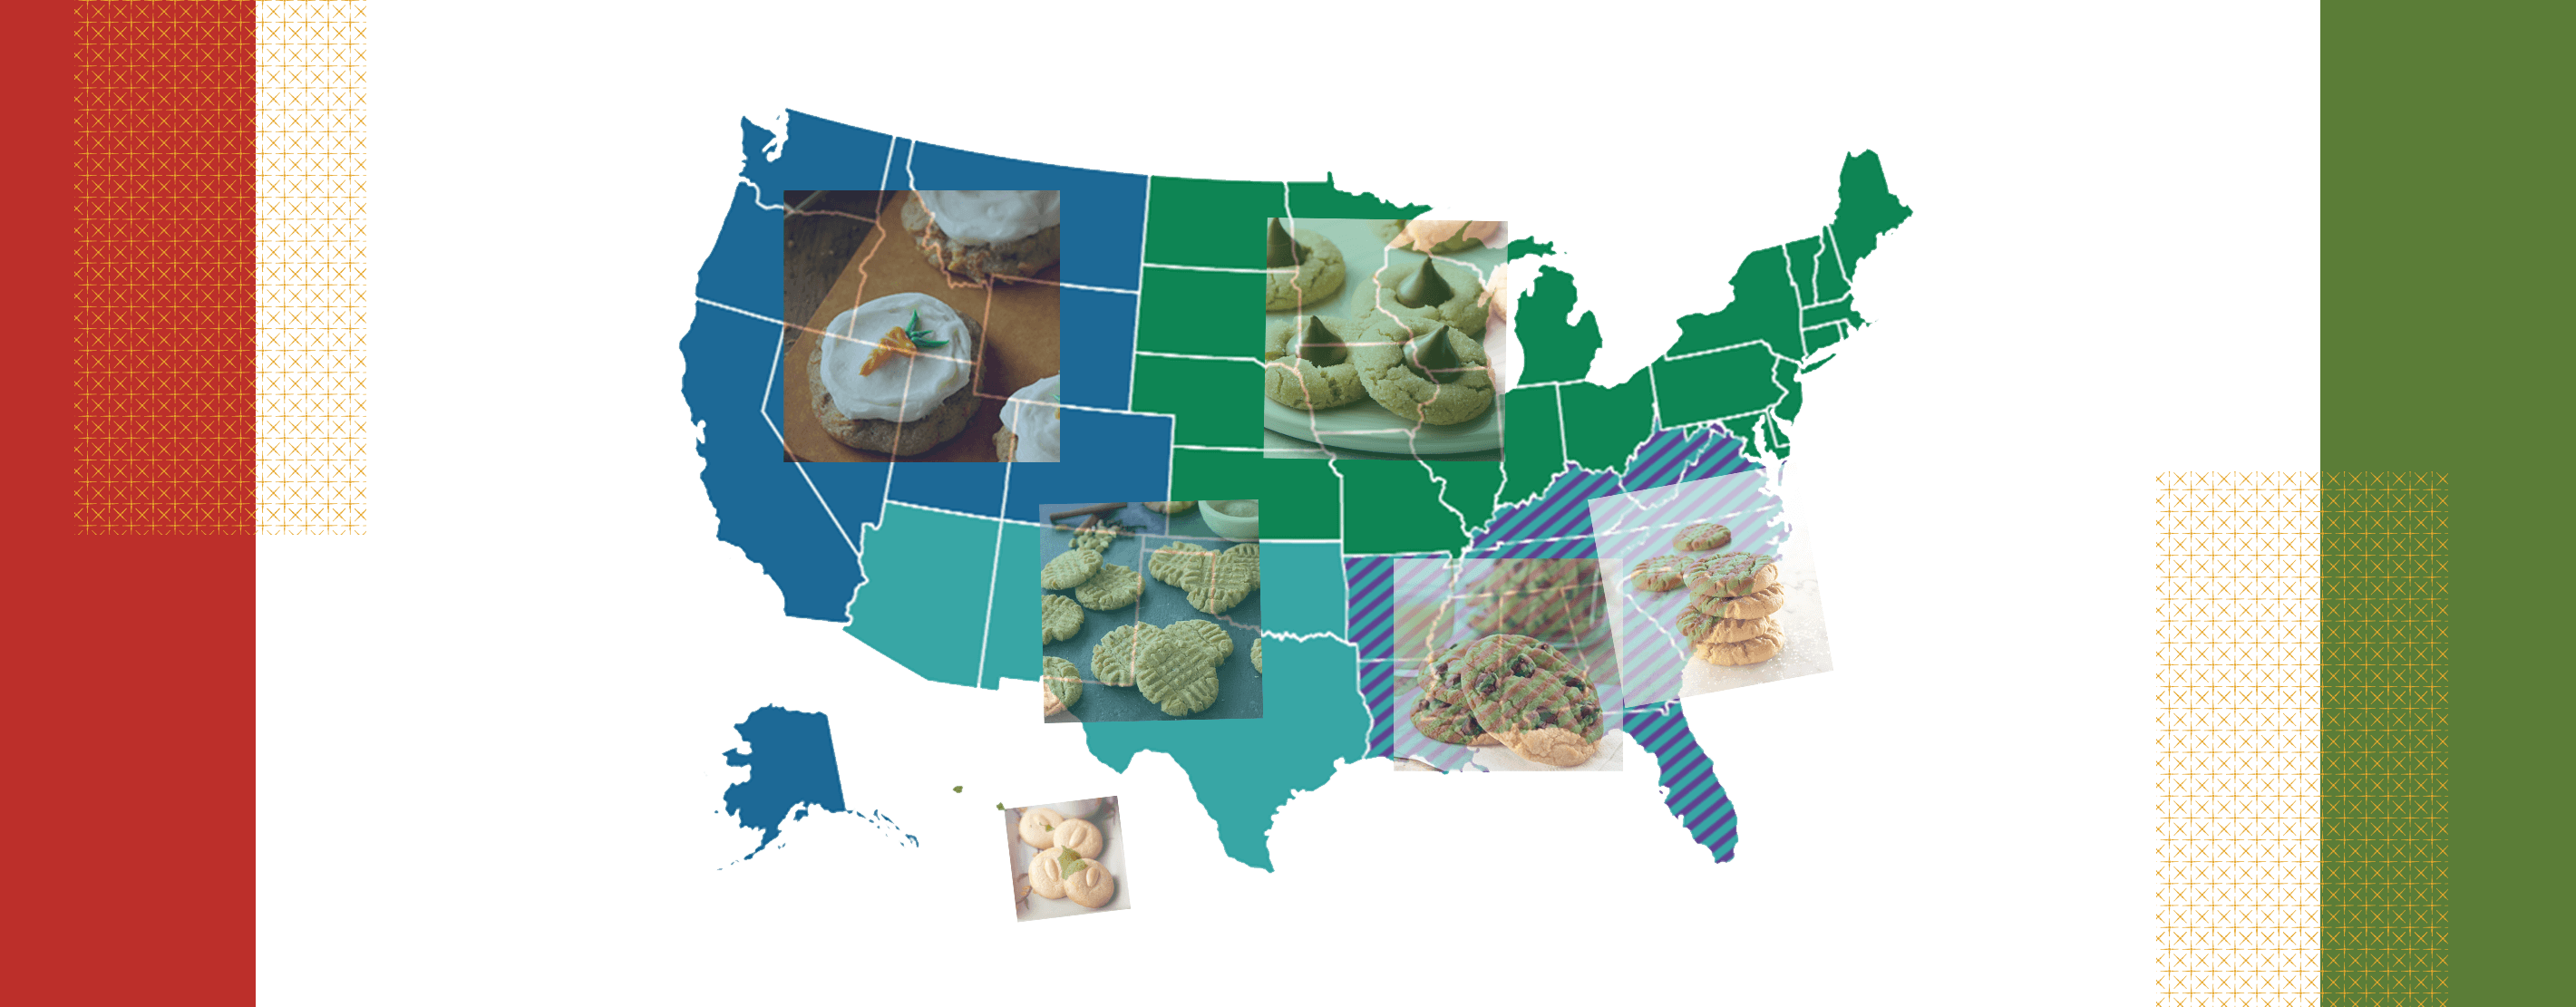 A Map Of The United States And Region's Most Popular Cookie